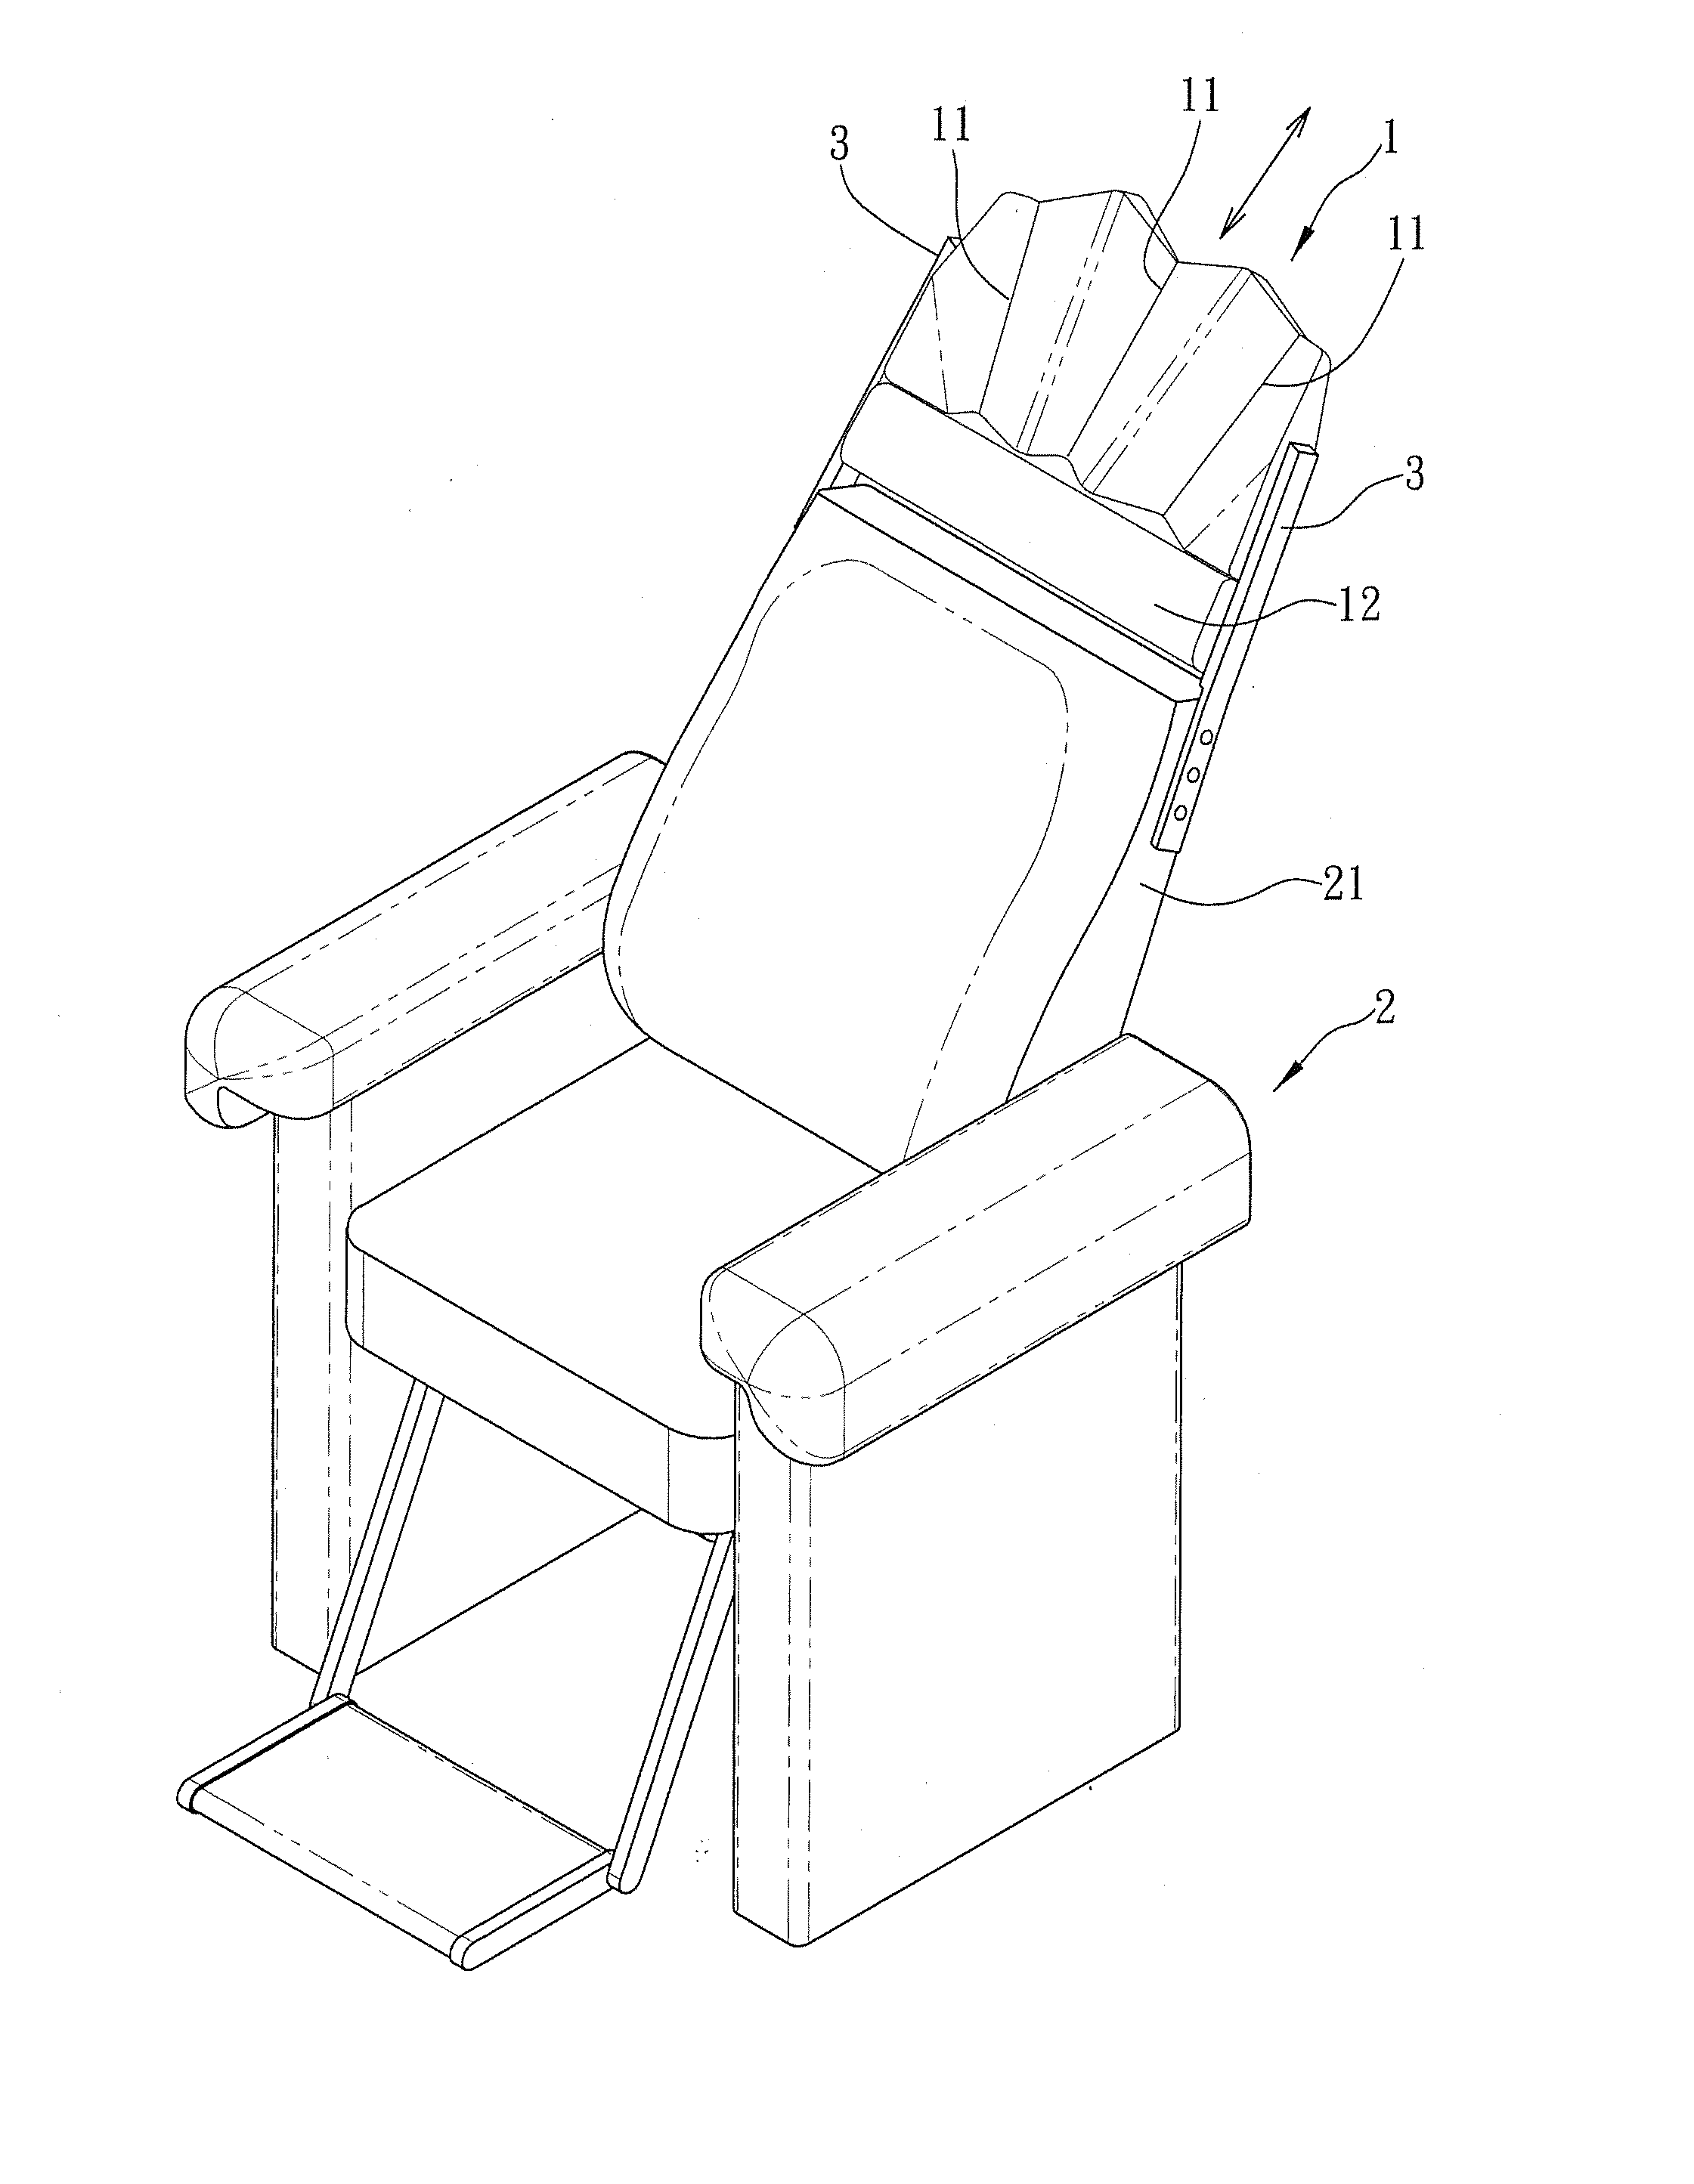 Chair with a head and neck support structure